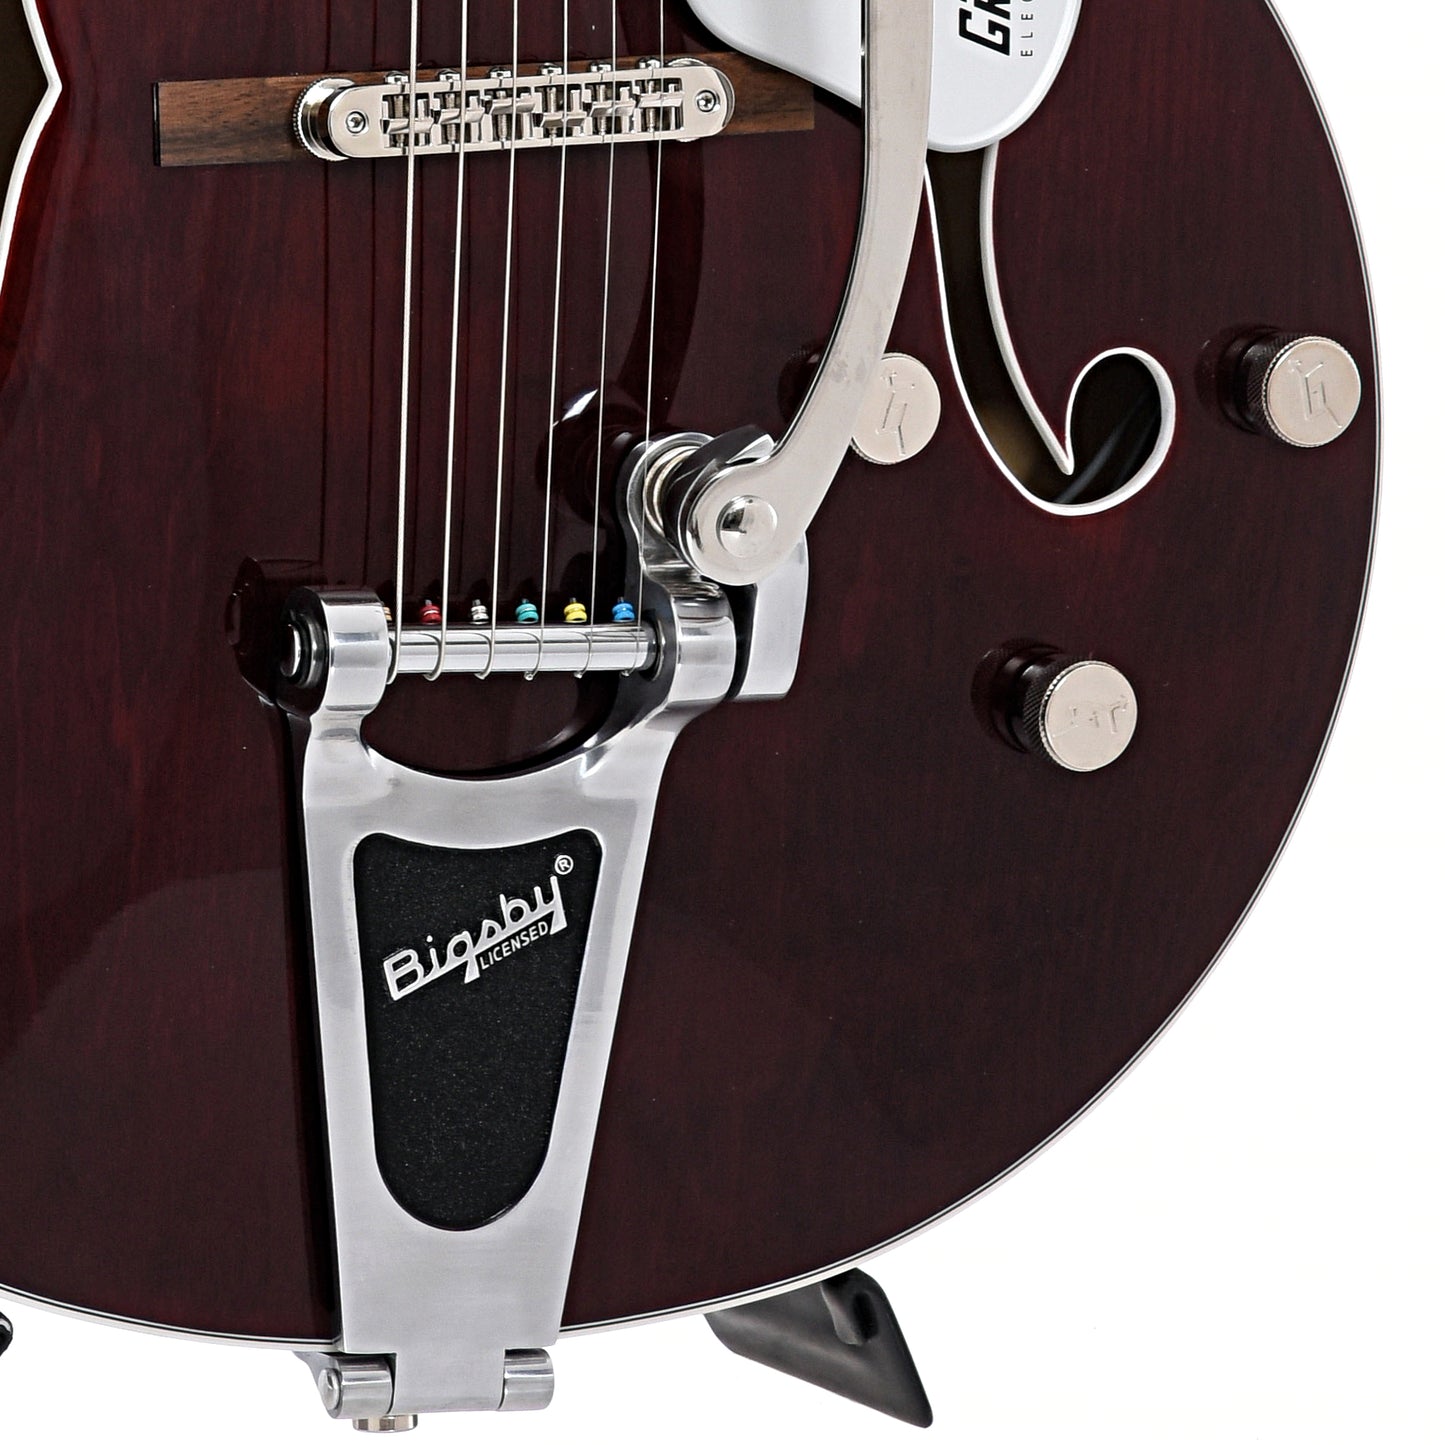 Image 4 of Gretsch G5420T Electromatic Classic Hollow Body Single Cut with Bigbsy, Walnut Stain- SKU# G5420T-WLNT : Product Type Hollow Body Electric Guitars : Elderly Instruments